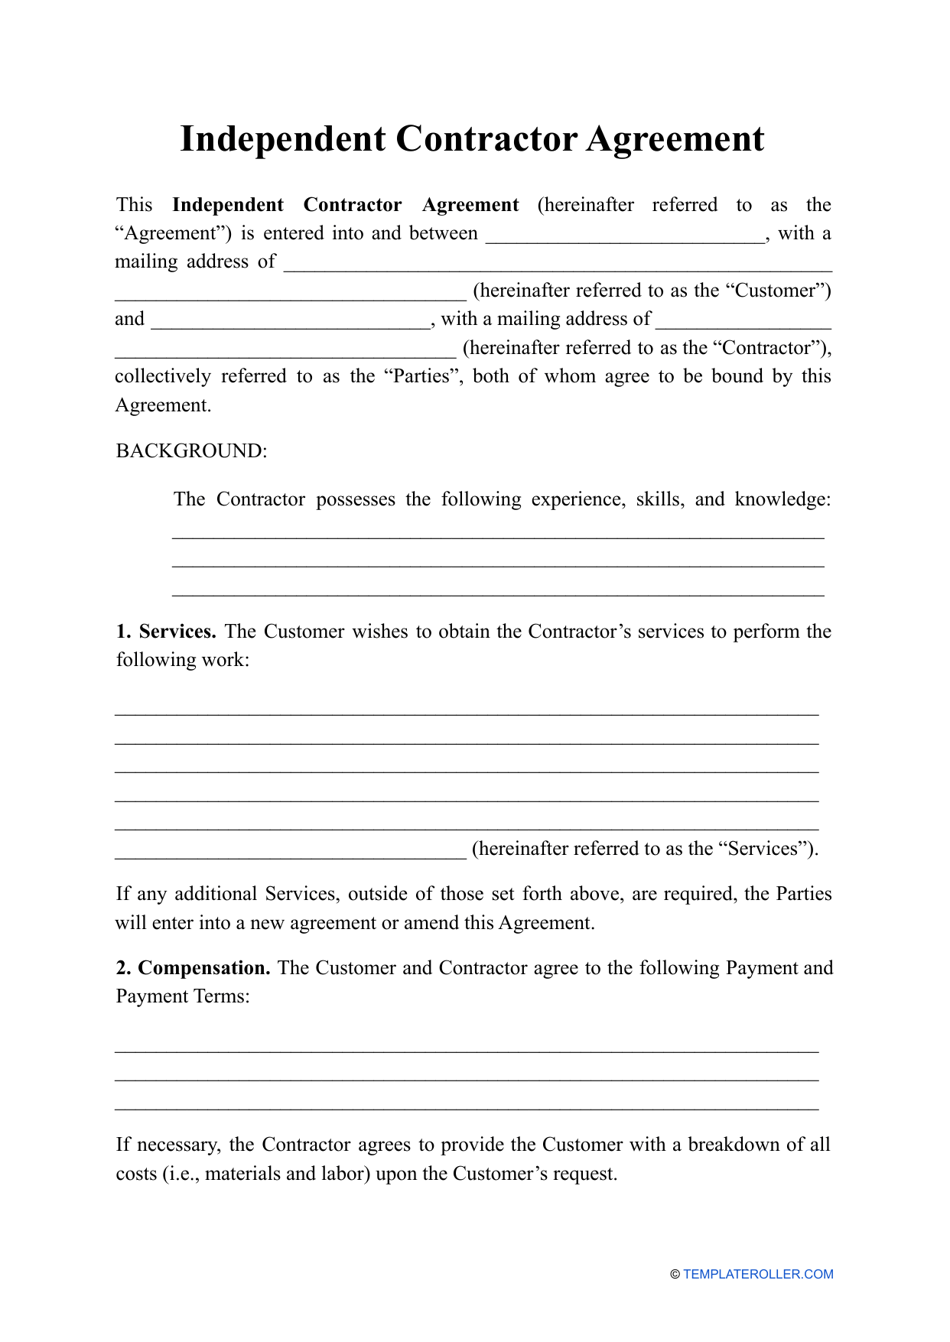 Independent Contractor Agreement Template Fill Out Sign Online and